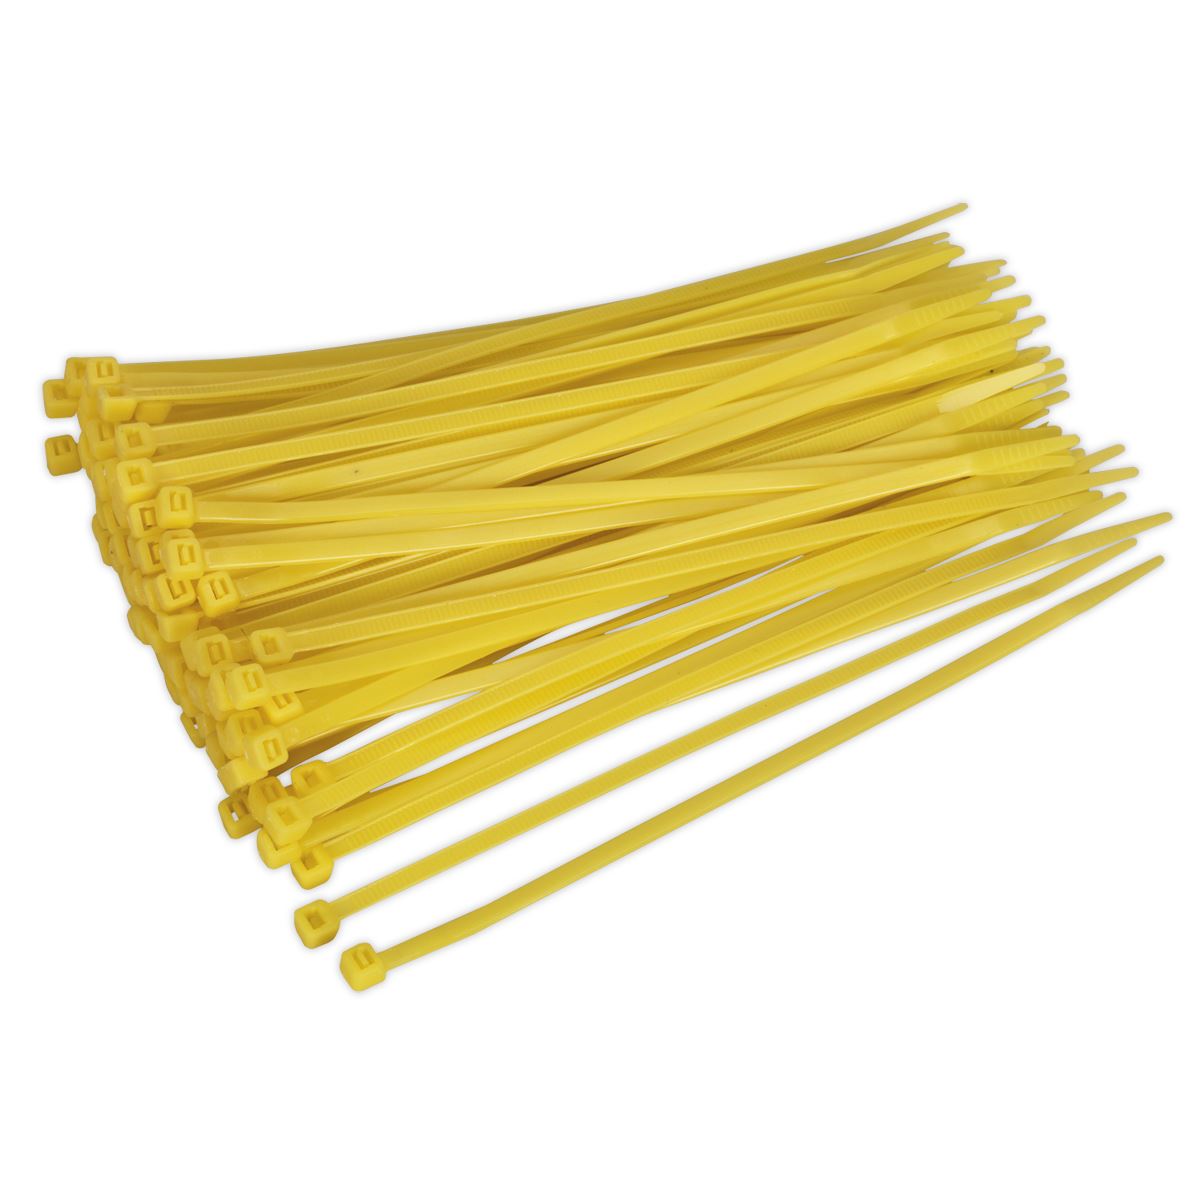 Sealey Cable Tie 200 x 4.4mm Yellow Pack of 100